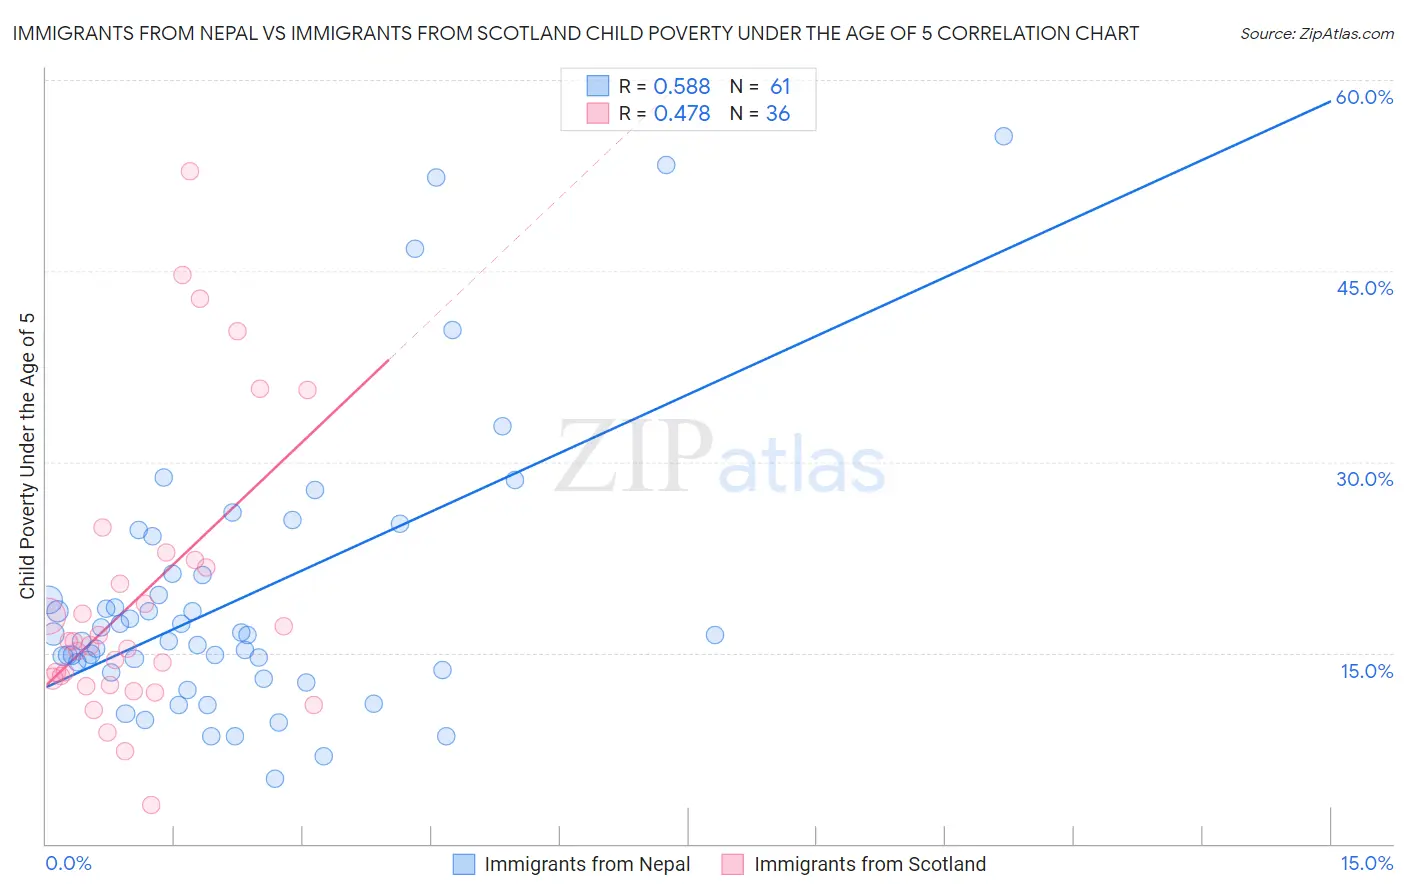 Immigrants from Nepal vs Immigrants from Scotland Child Poverty Under the Age of 5